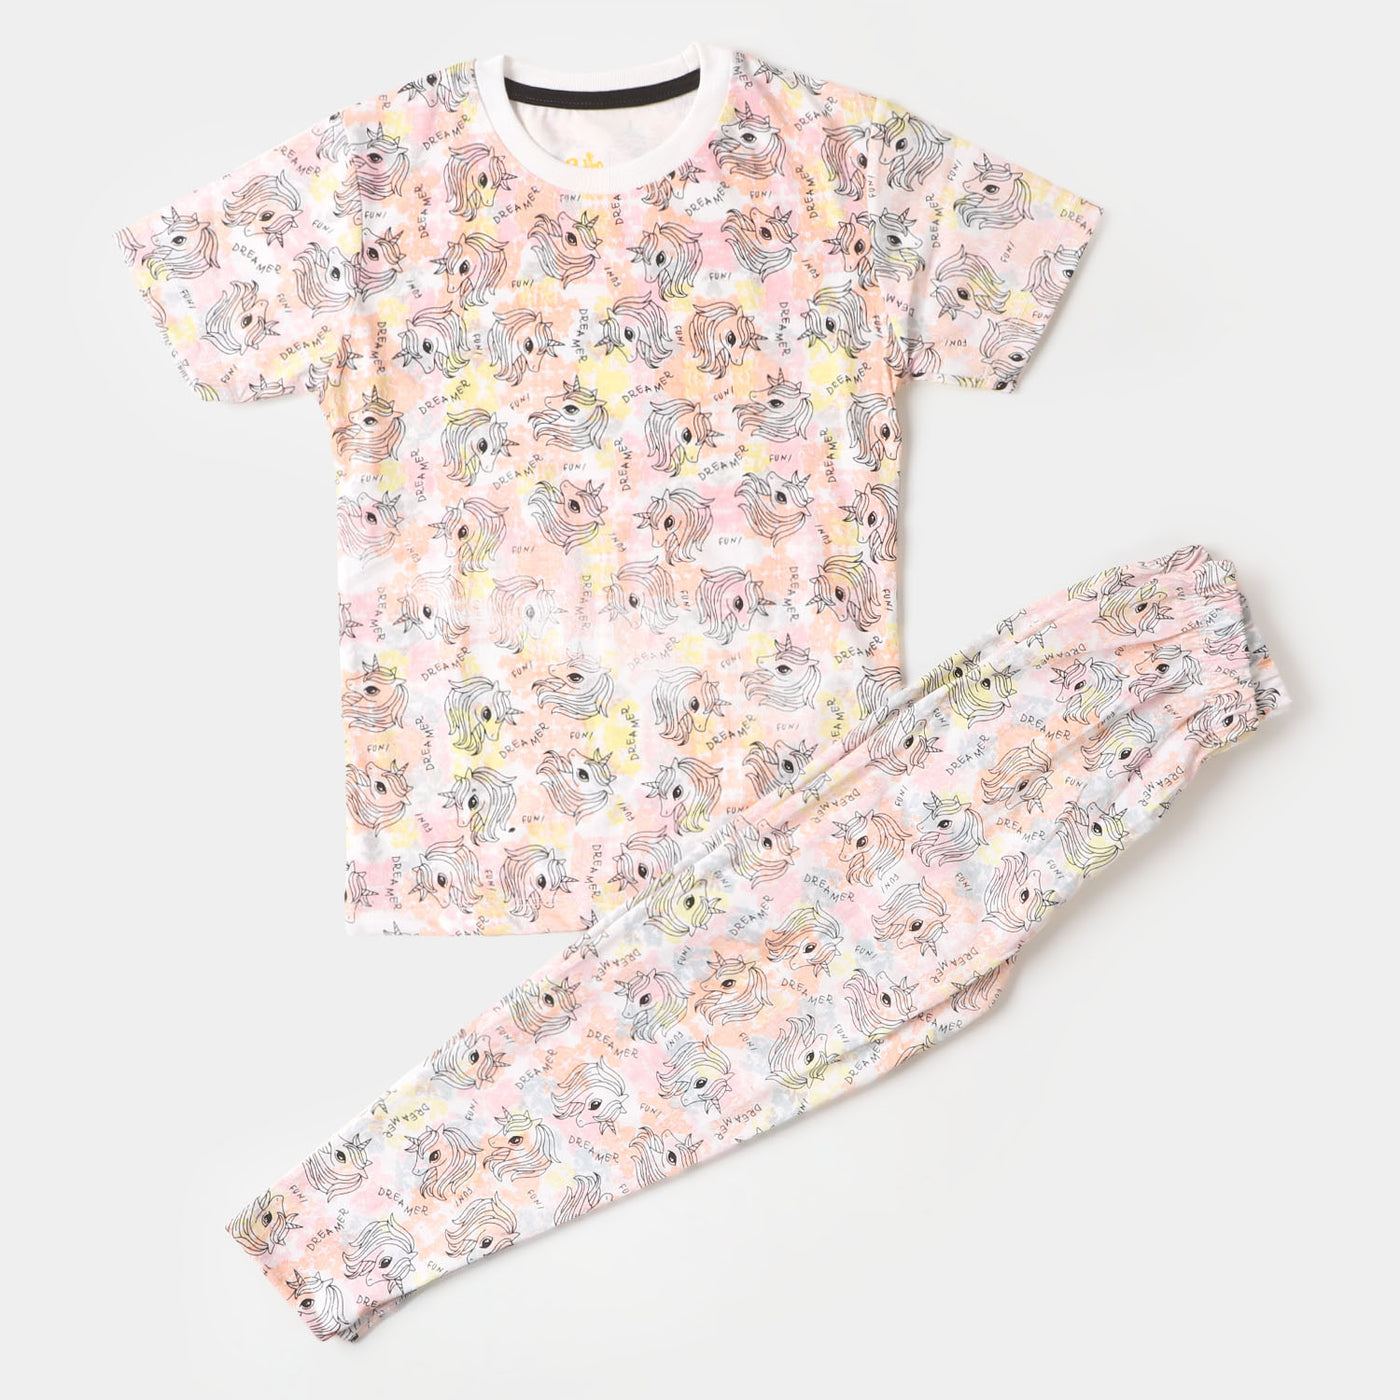 Girls Knitted Night Suit Printed - White